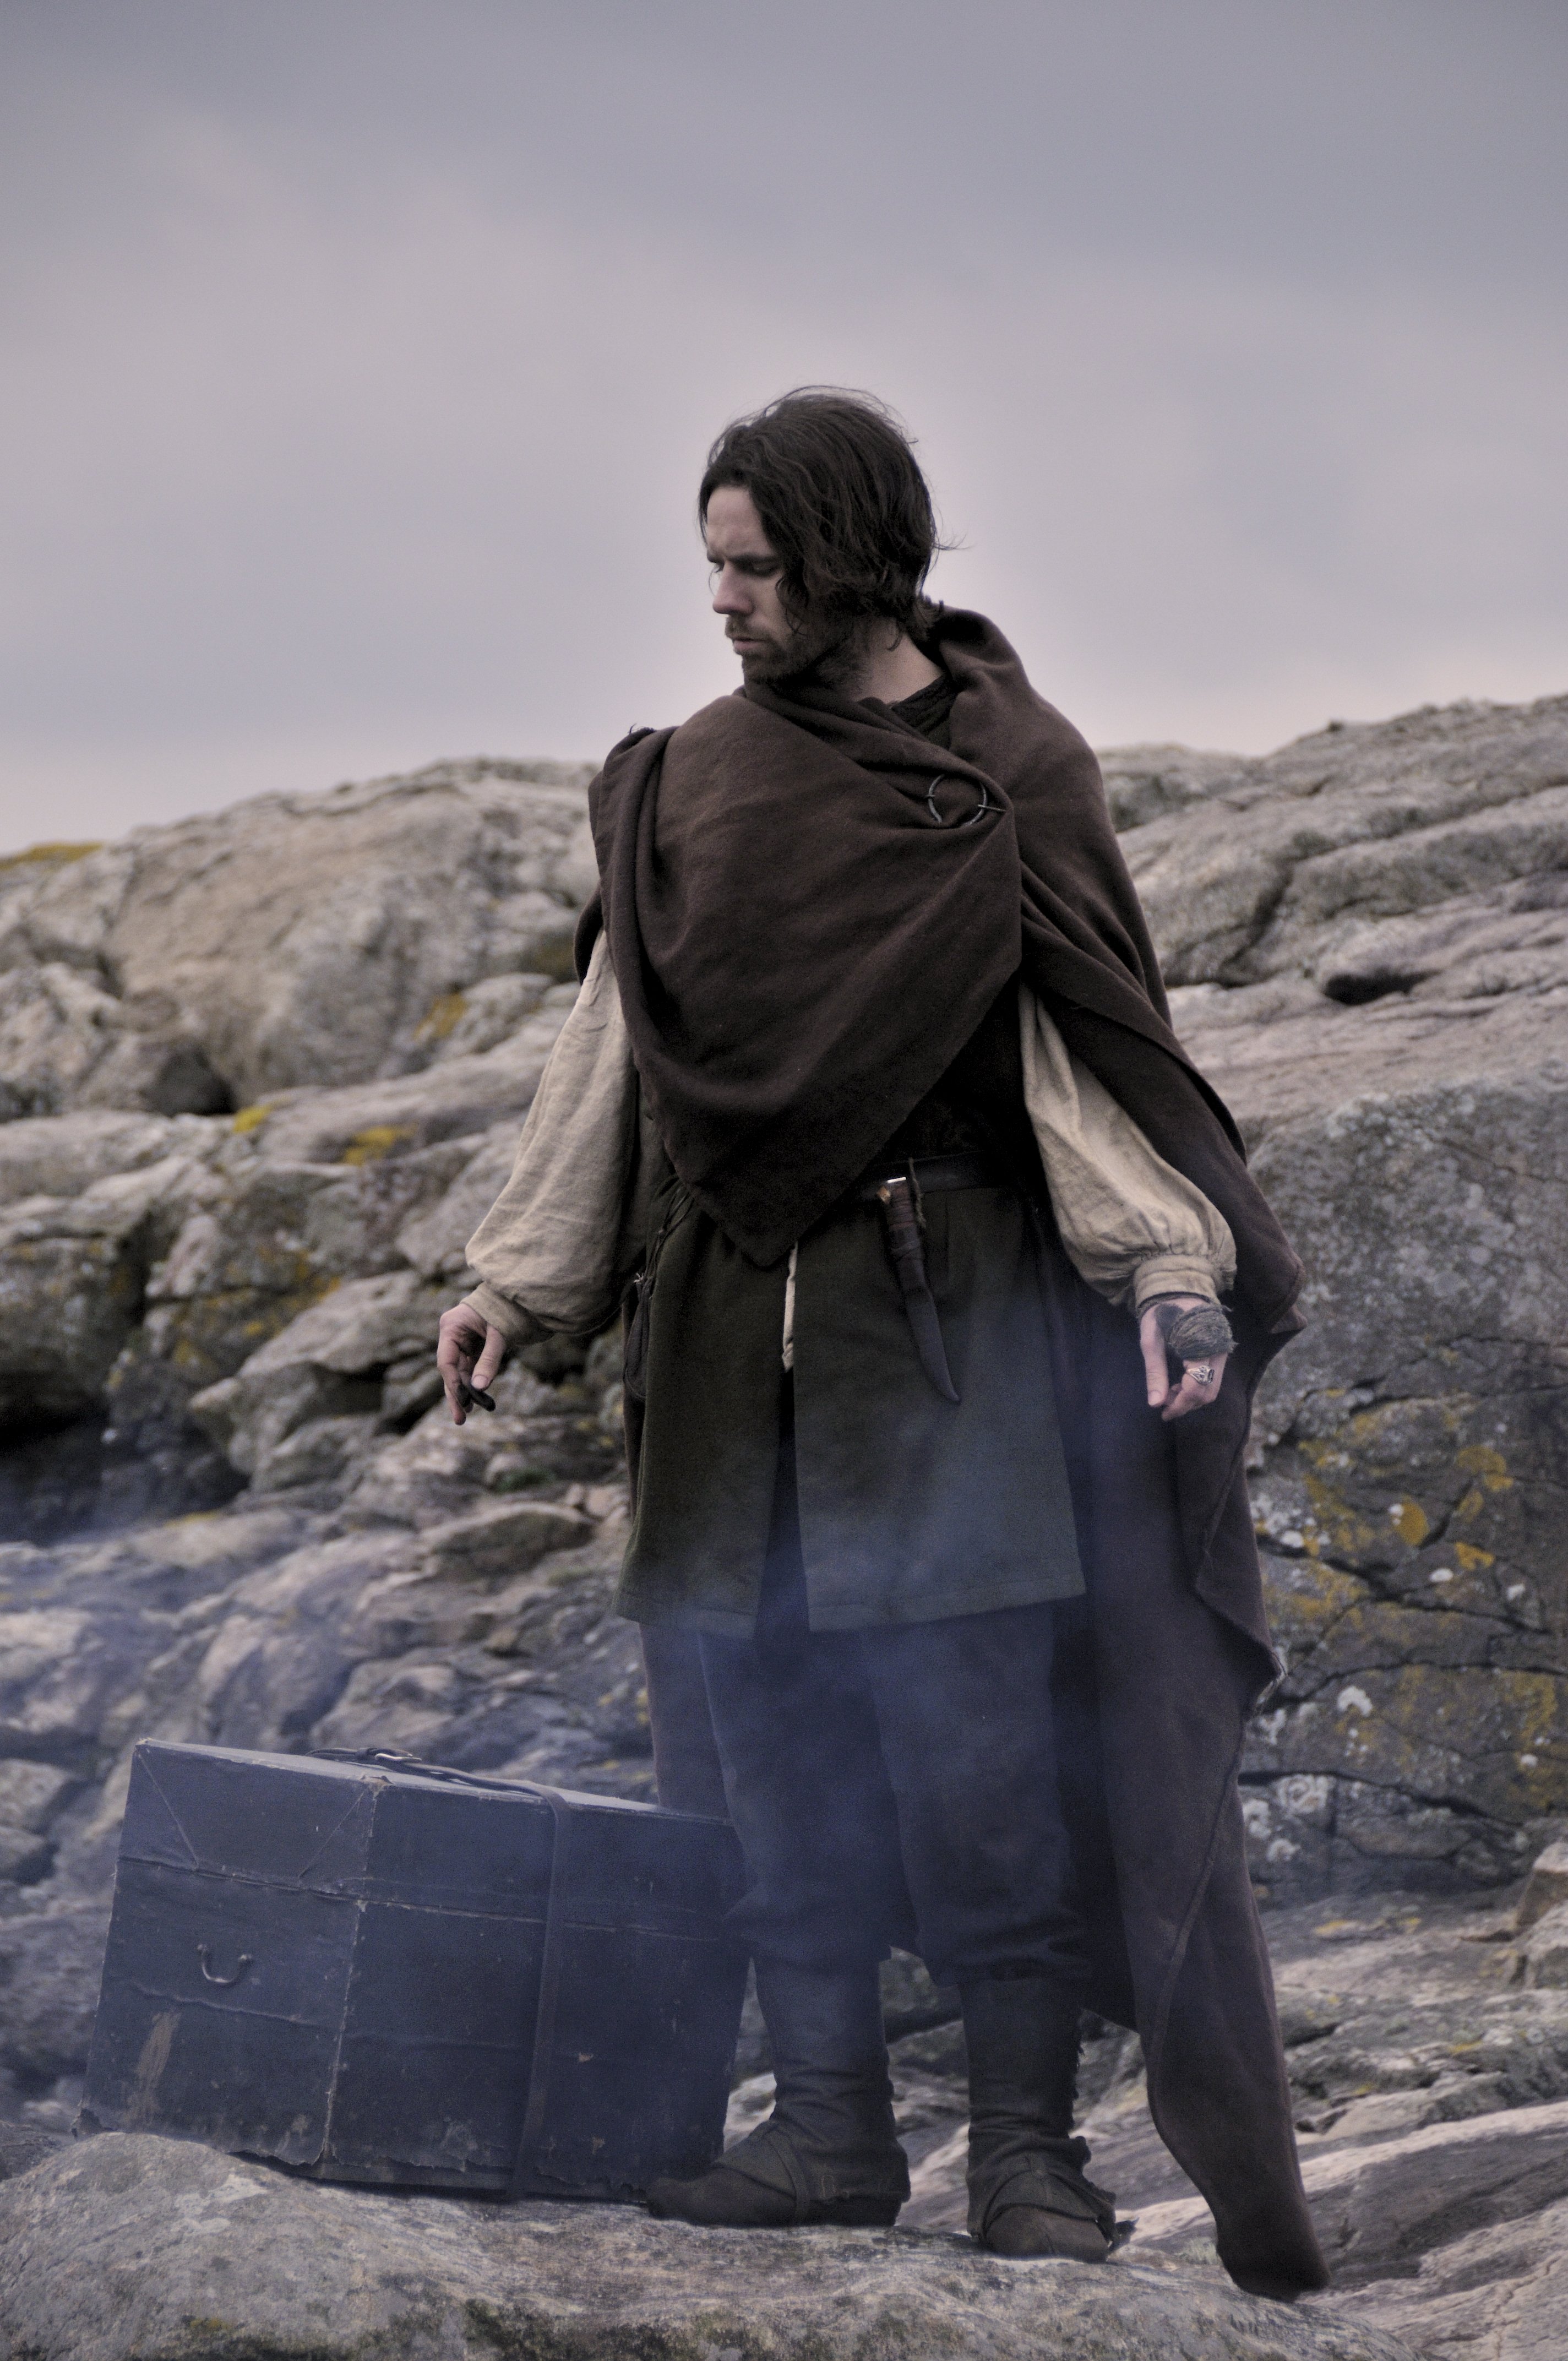 Leif Nygaard as Vilhelm from the film 